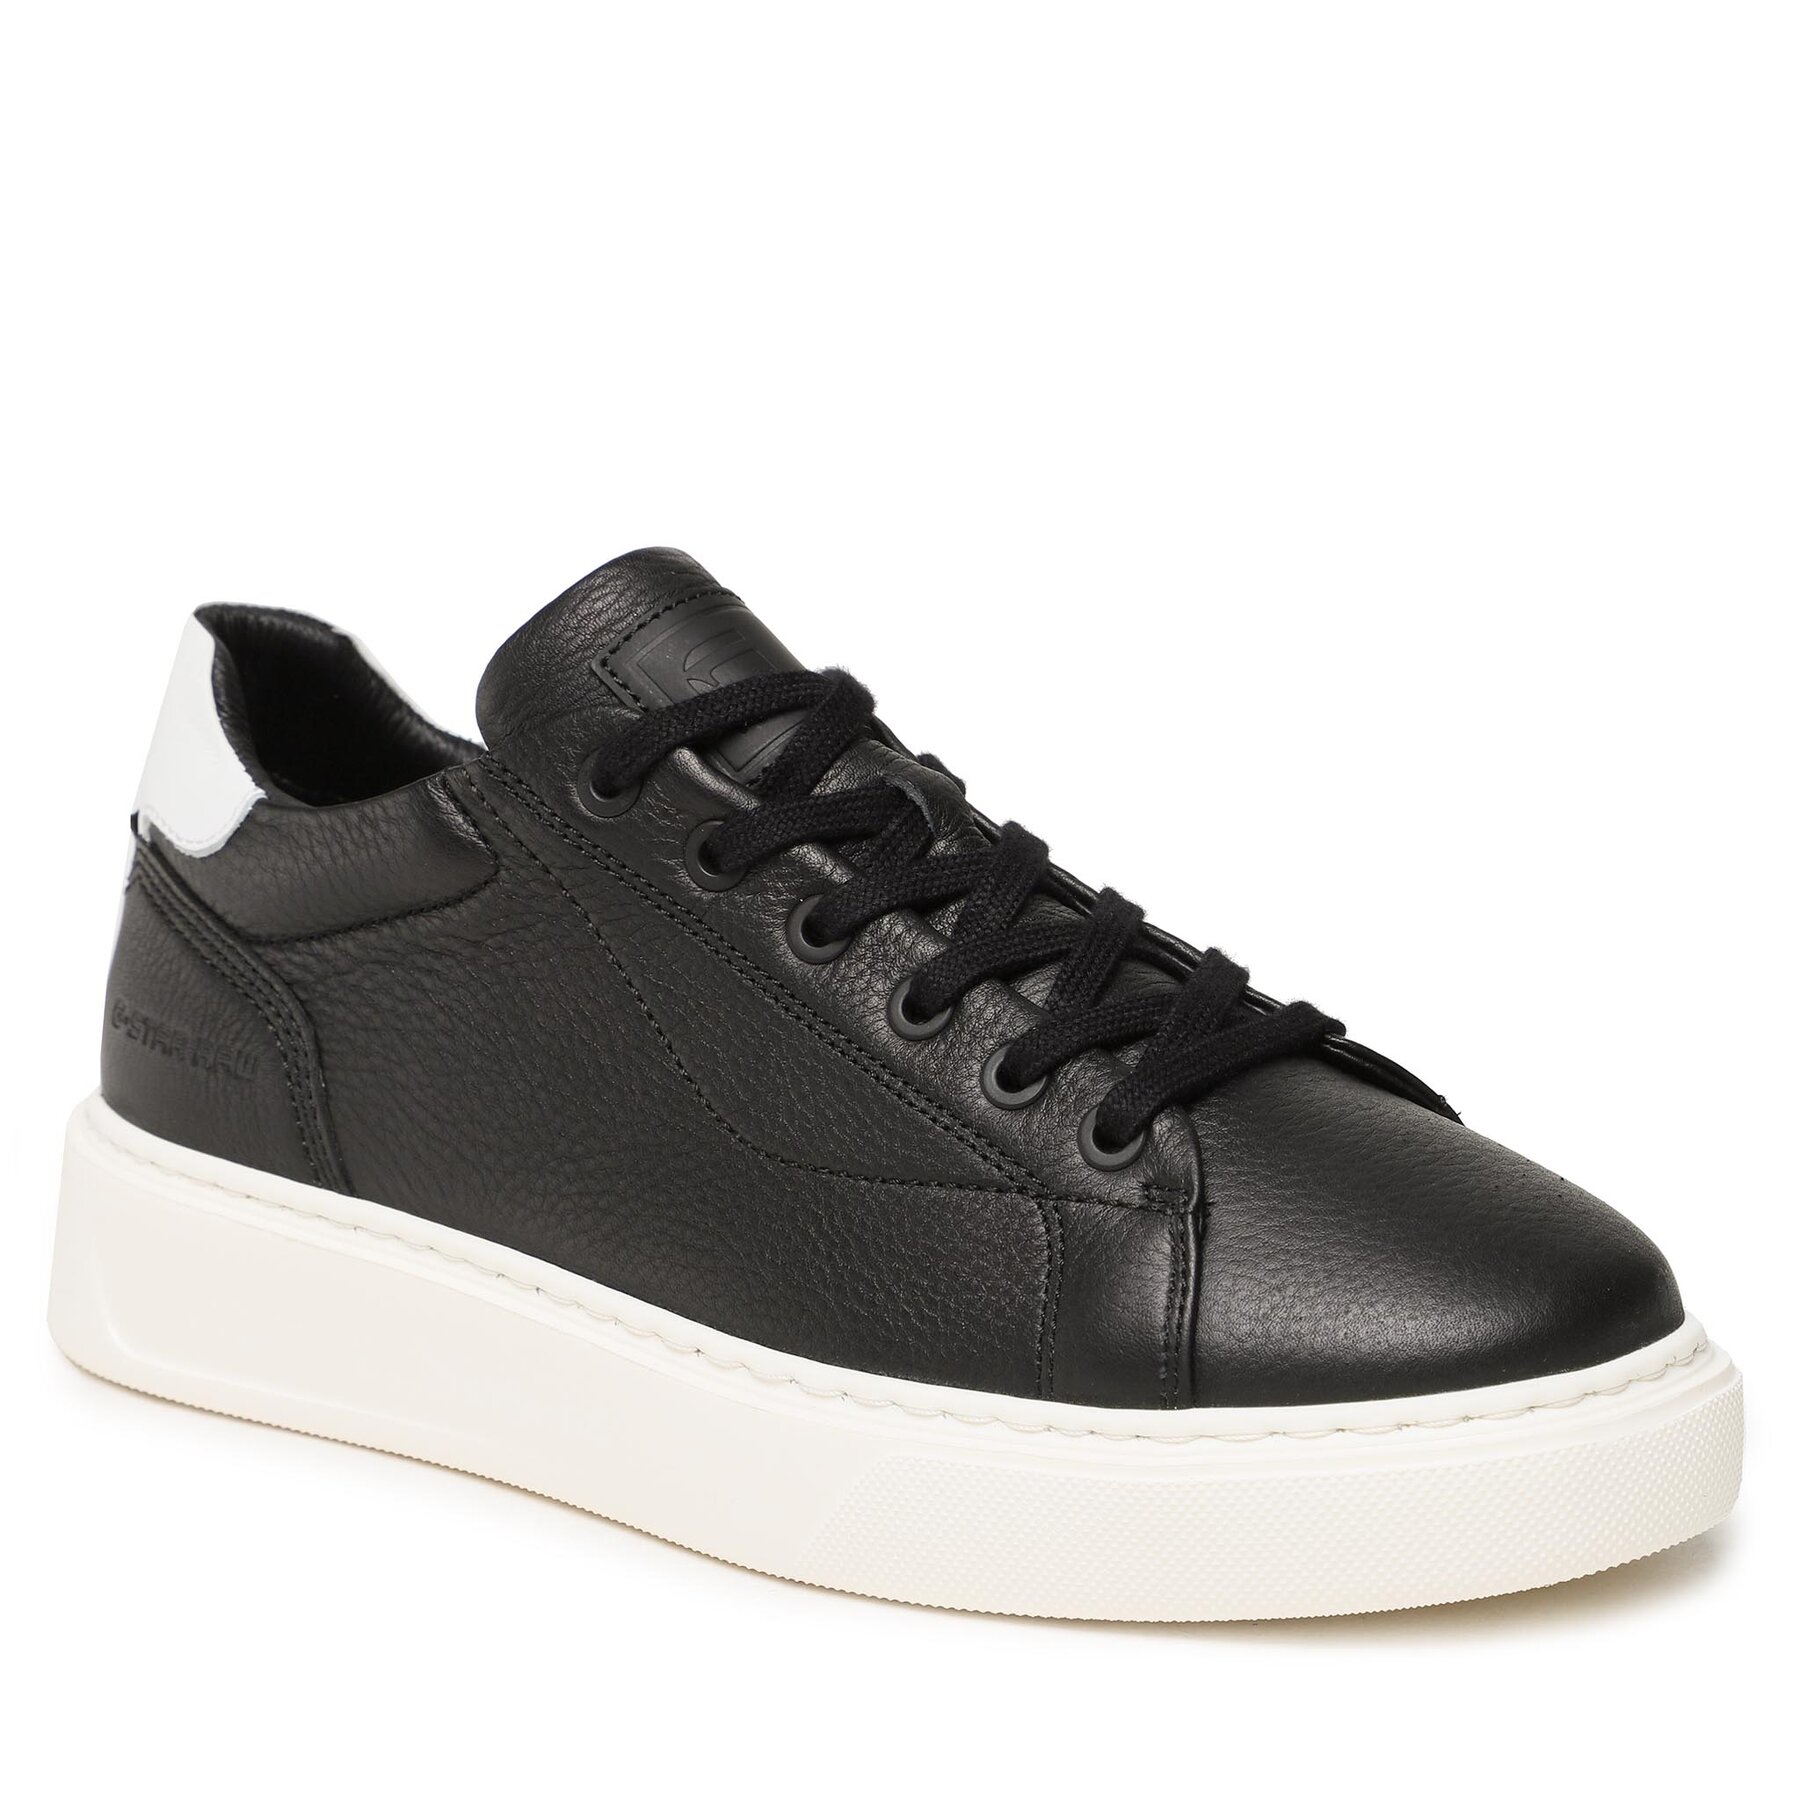 Sneakers G-Star Raw Rovic Lea M 2312 51501 Blk 0999